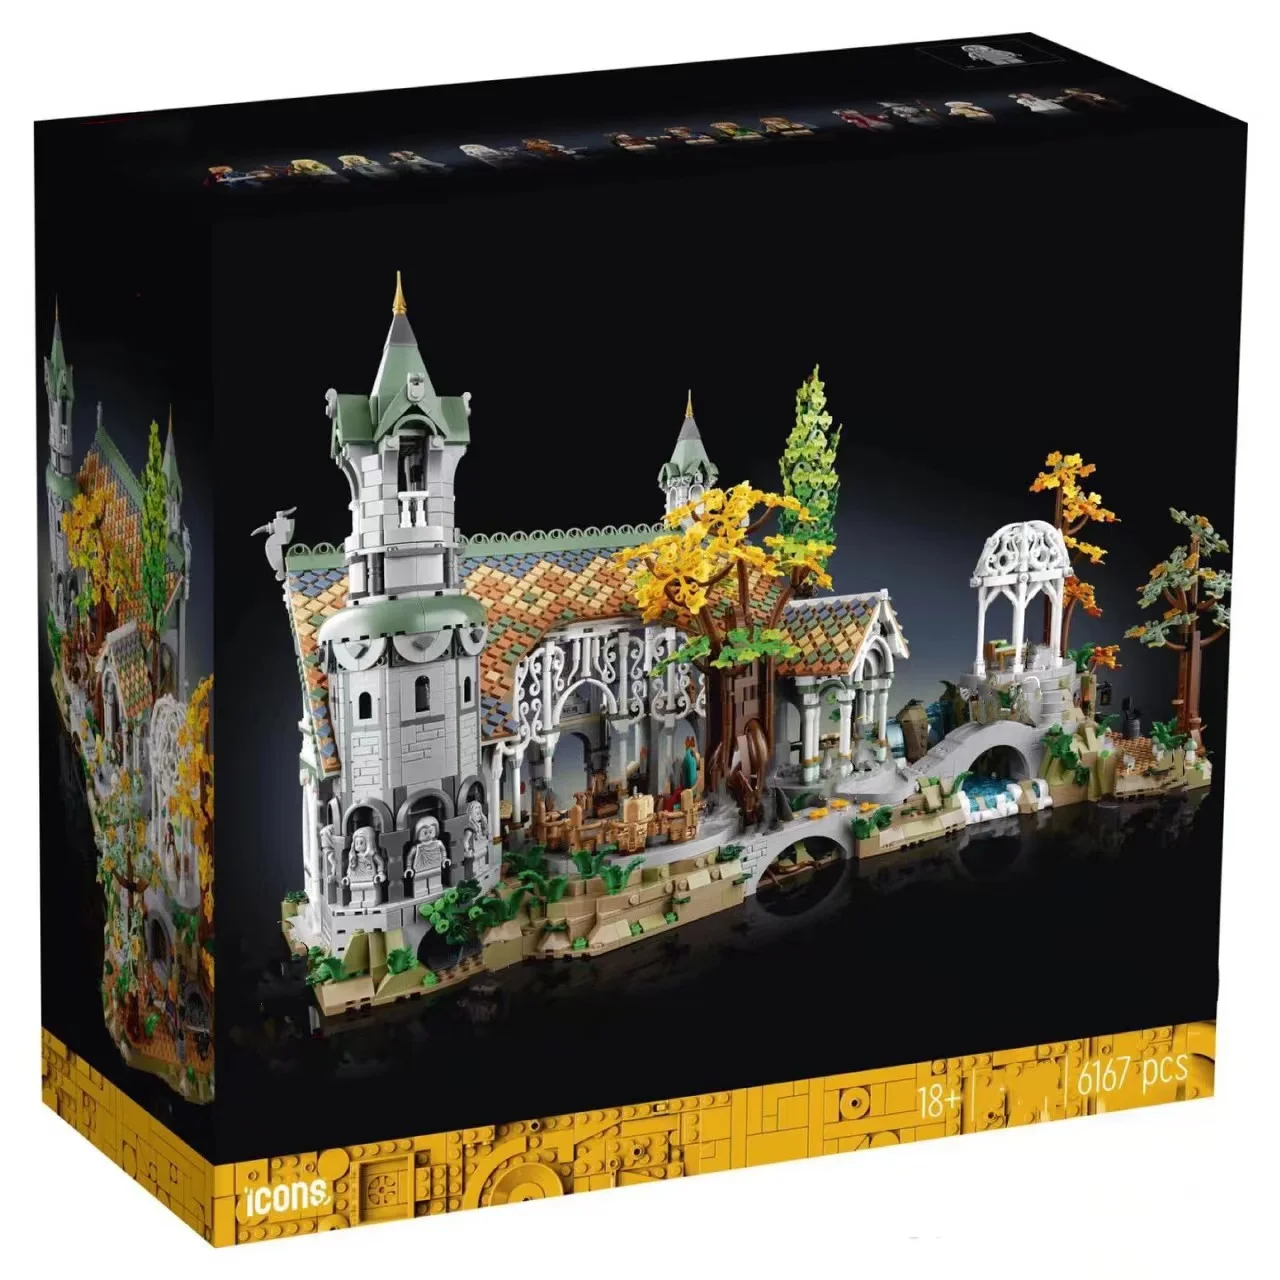 

In stock 10316 Lorded of Rings Rivendell With lighting Famous Movie Ideas Building Blocks Street View Castle Bricks Toy Gifts